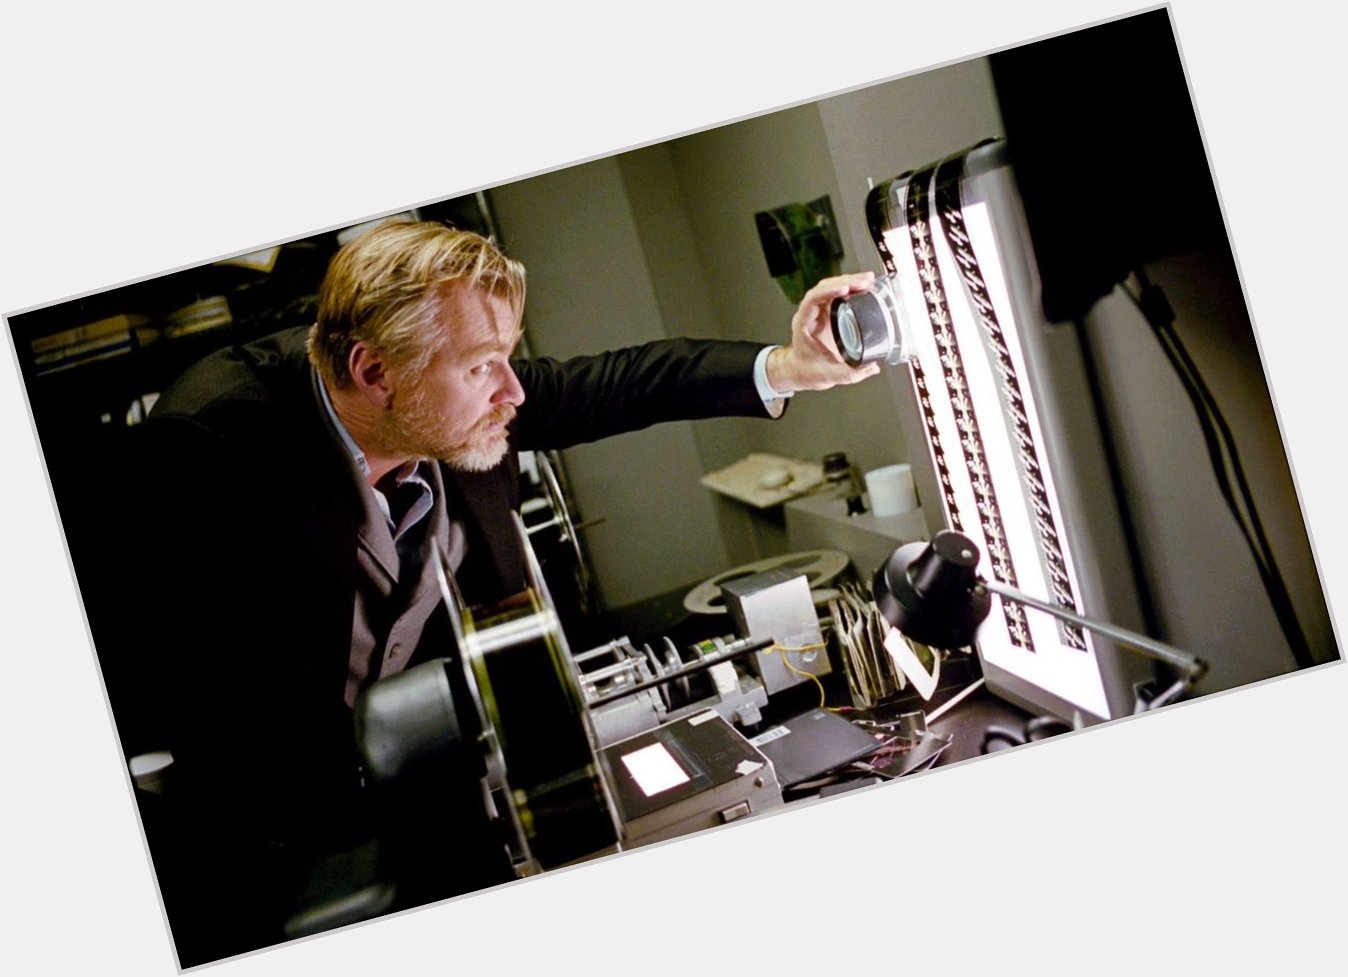 HAPPY BIRTHDAY TO OUR BELOVED CHRISTOPHER NOLAN, WHO TURNS 48 TODAY ! 